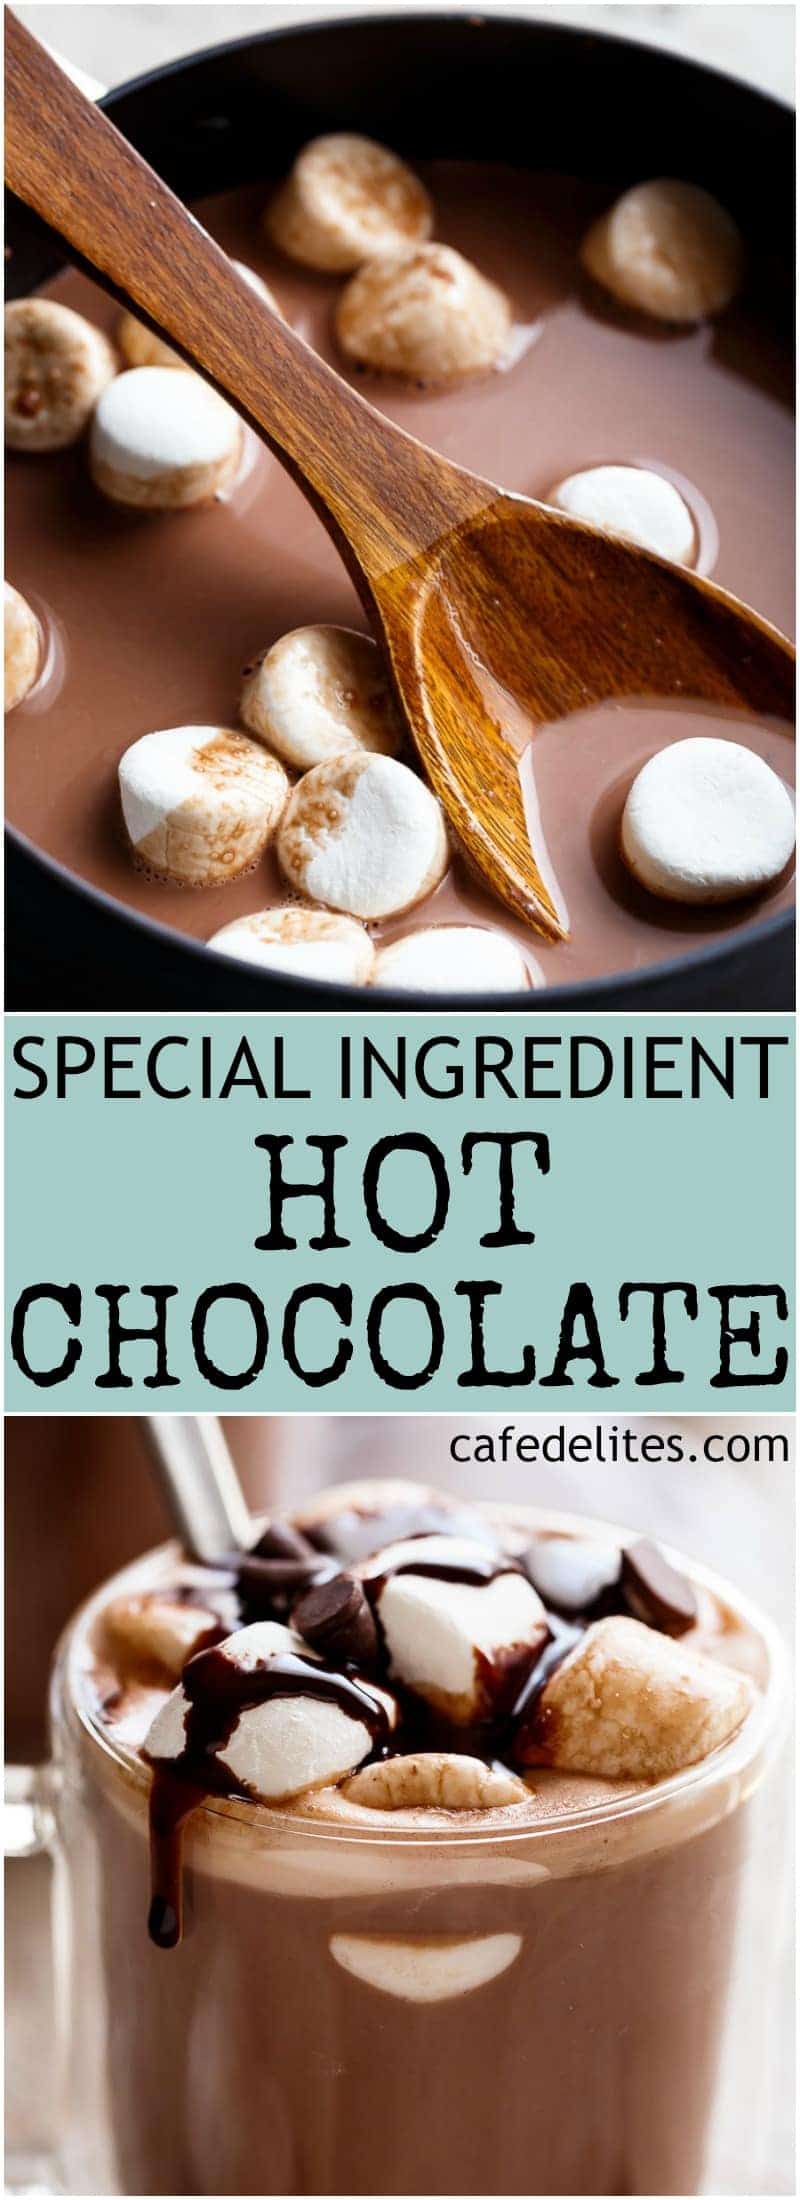 This Special Ingredient Hot Chocolate is so decadently rich and creamy, they'll be begging you for your secret! And half the calories! | https://cafedelites.com